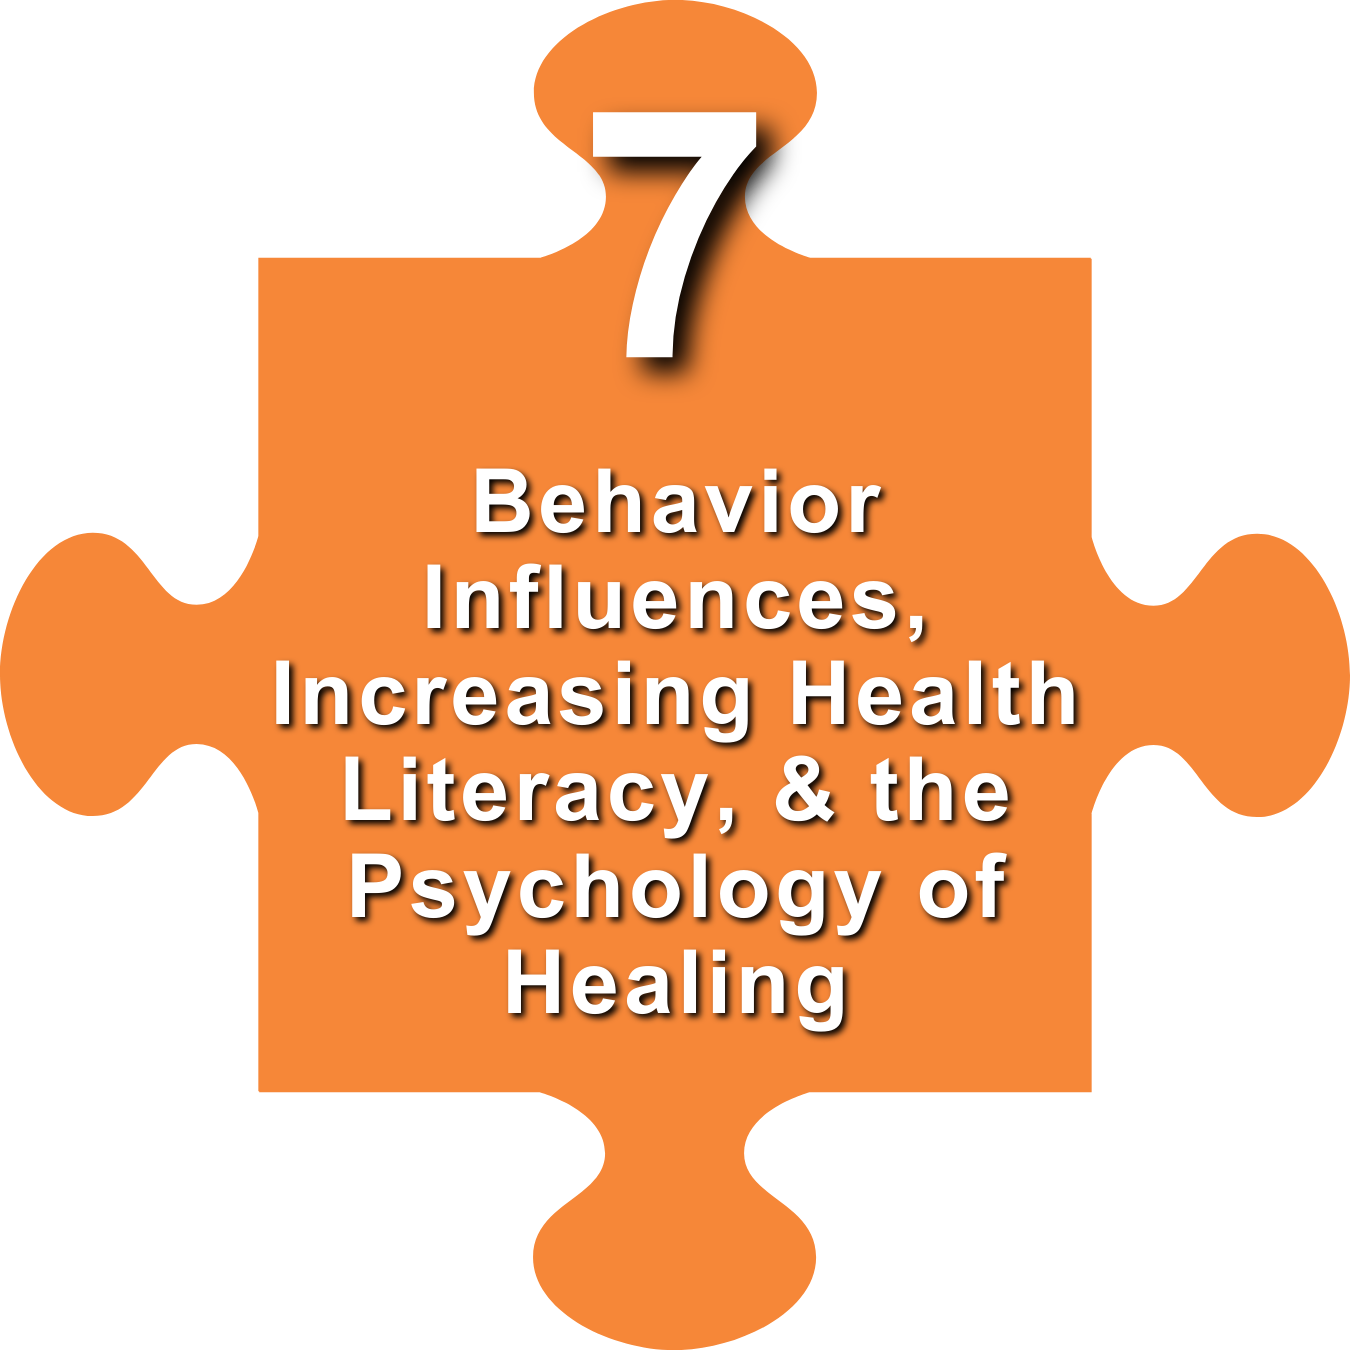 7.  Behavior Influences, Increasing Health Literacy, and the Psychology of Healing